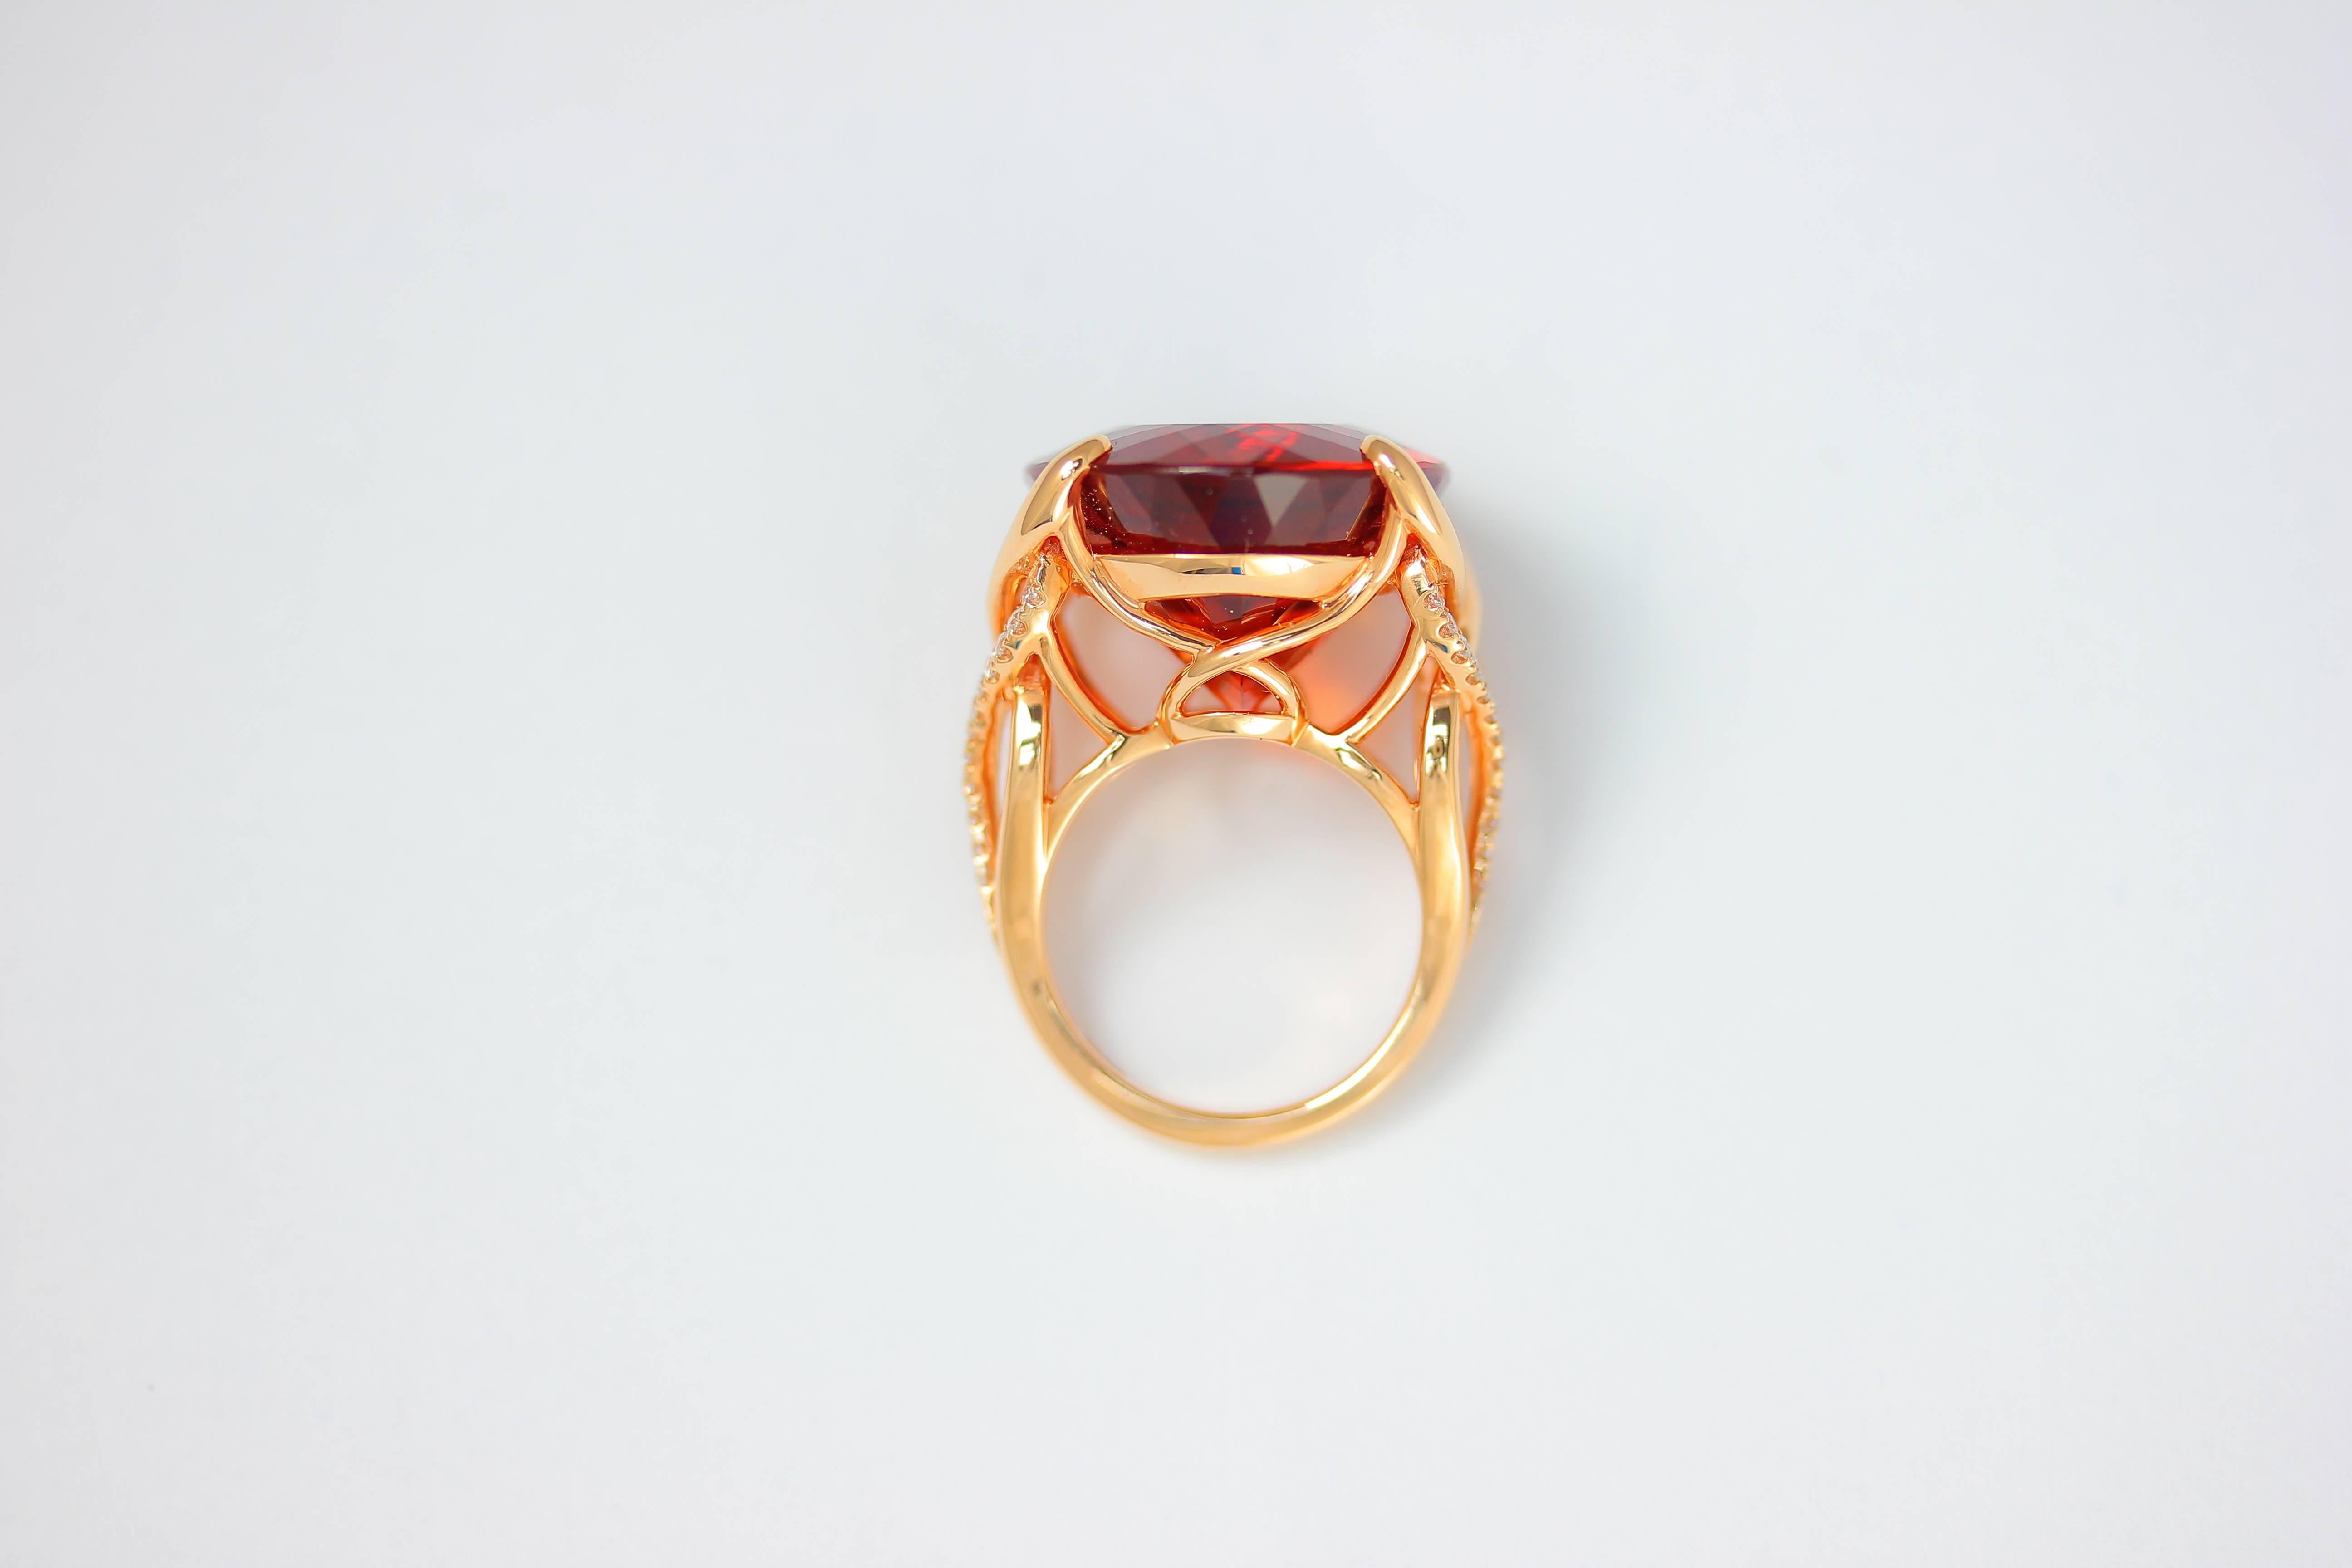 One-of-a-kind Frederic Sage oval Madeira Citrine cocktail ring with microset diamond accents set in 18 karat rose gold

Total Madeira Citrine weight: 31.30 ct
Total diamond count: 48
Total diamond weight: 0.40 ct